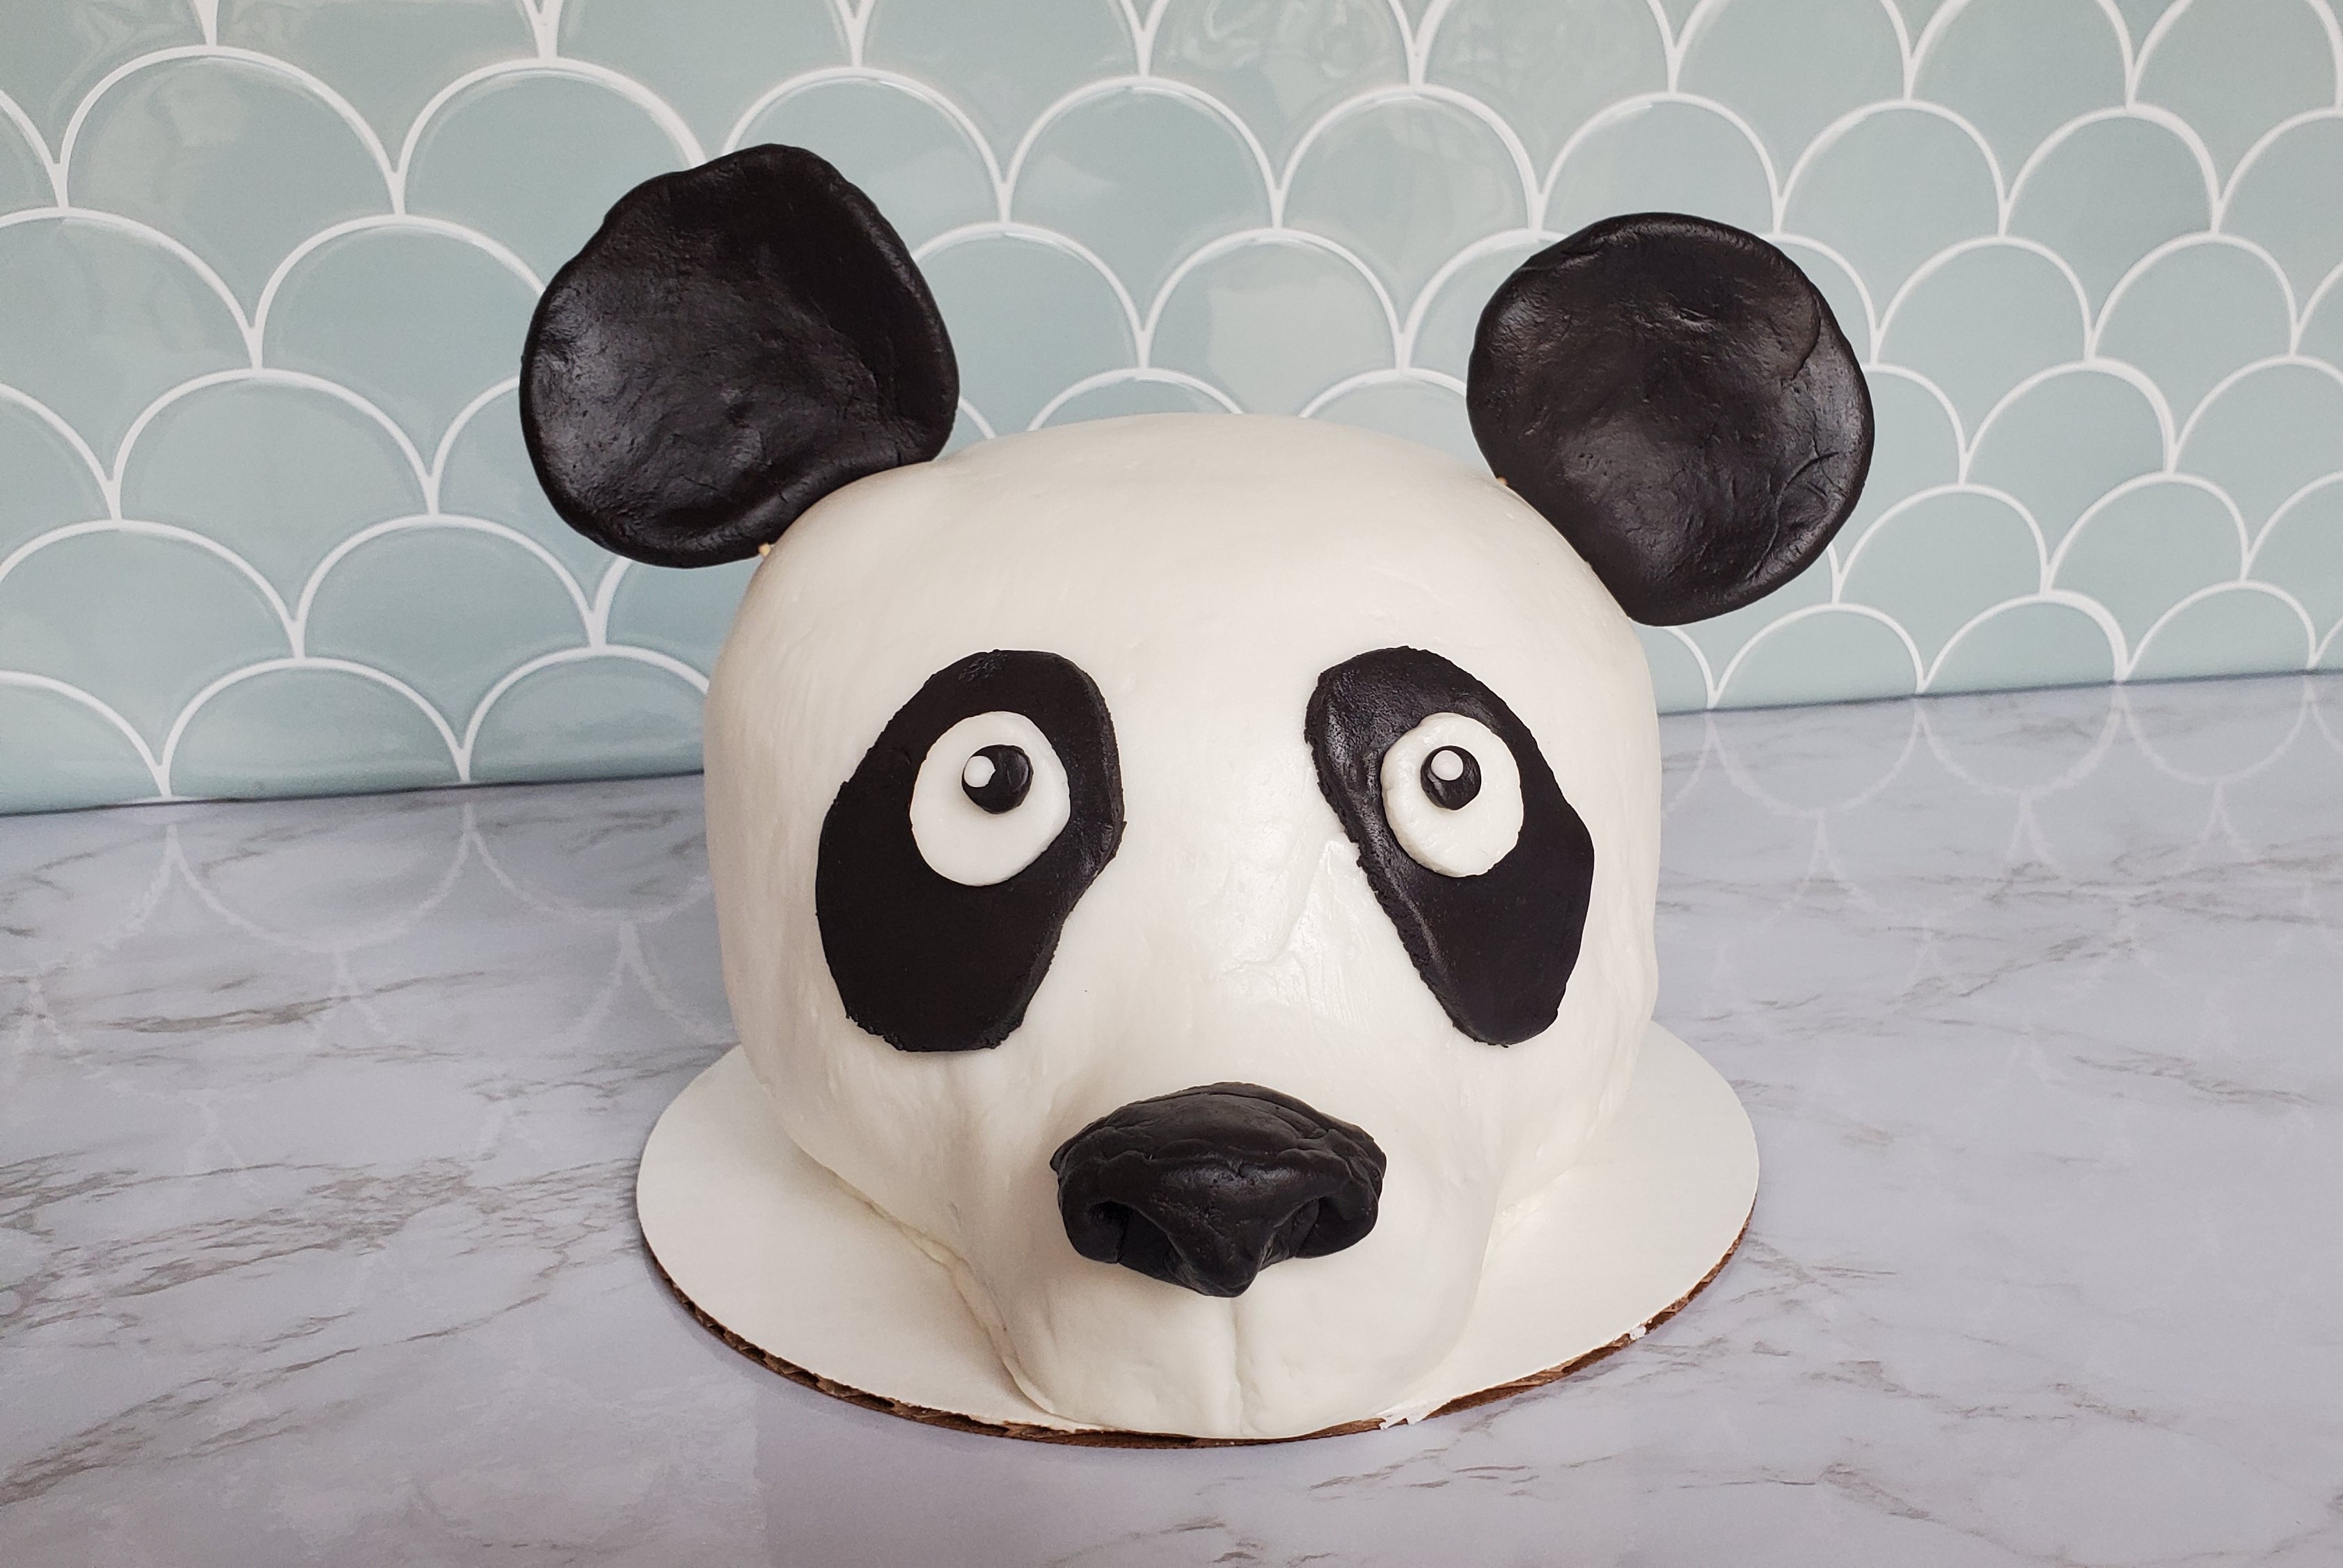 A cake that is decorated with fondant to look like the head of a panda. On a white marble countertop with a turquoise shell tile background.